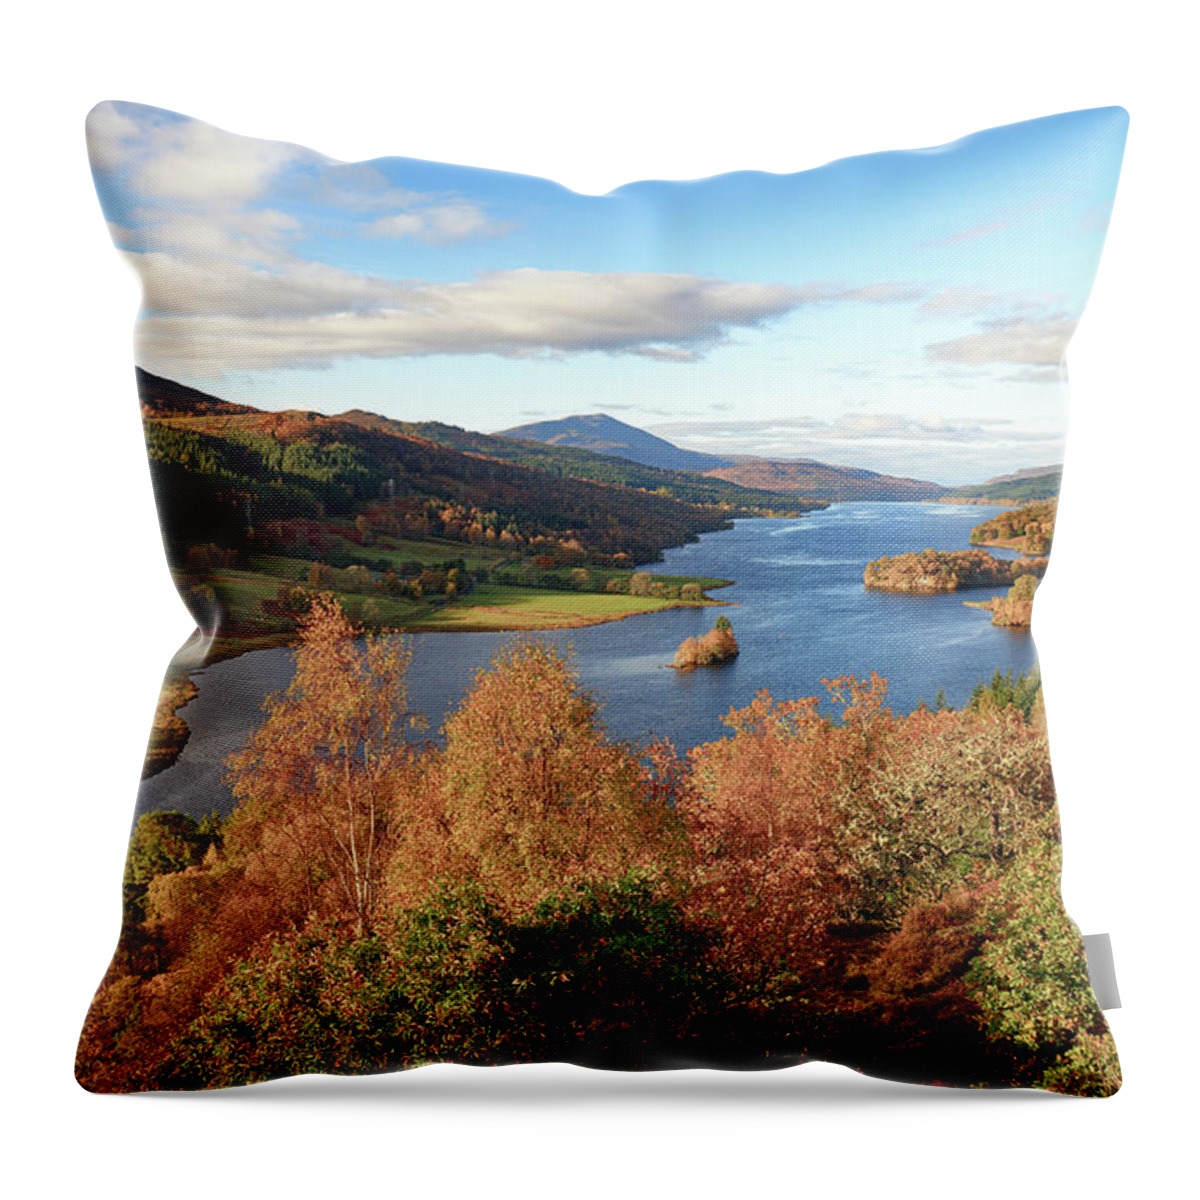 Queens View Throw Pillow featuring the photograph Queens View by Grant Glendinning